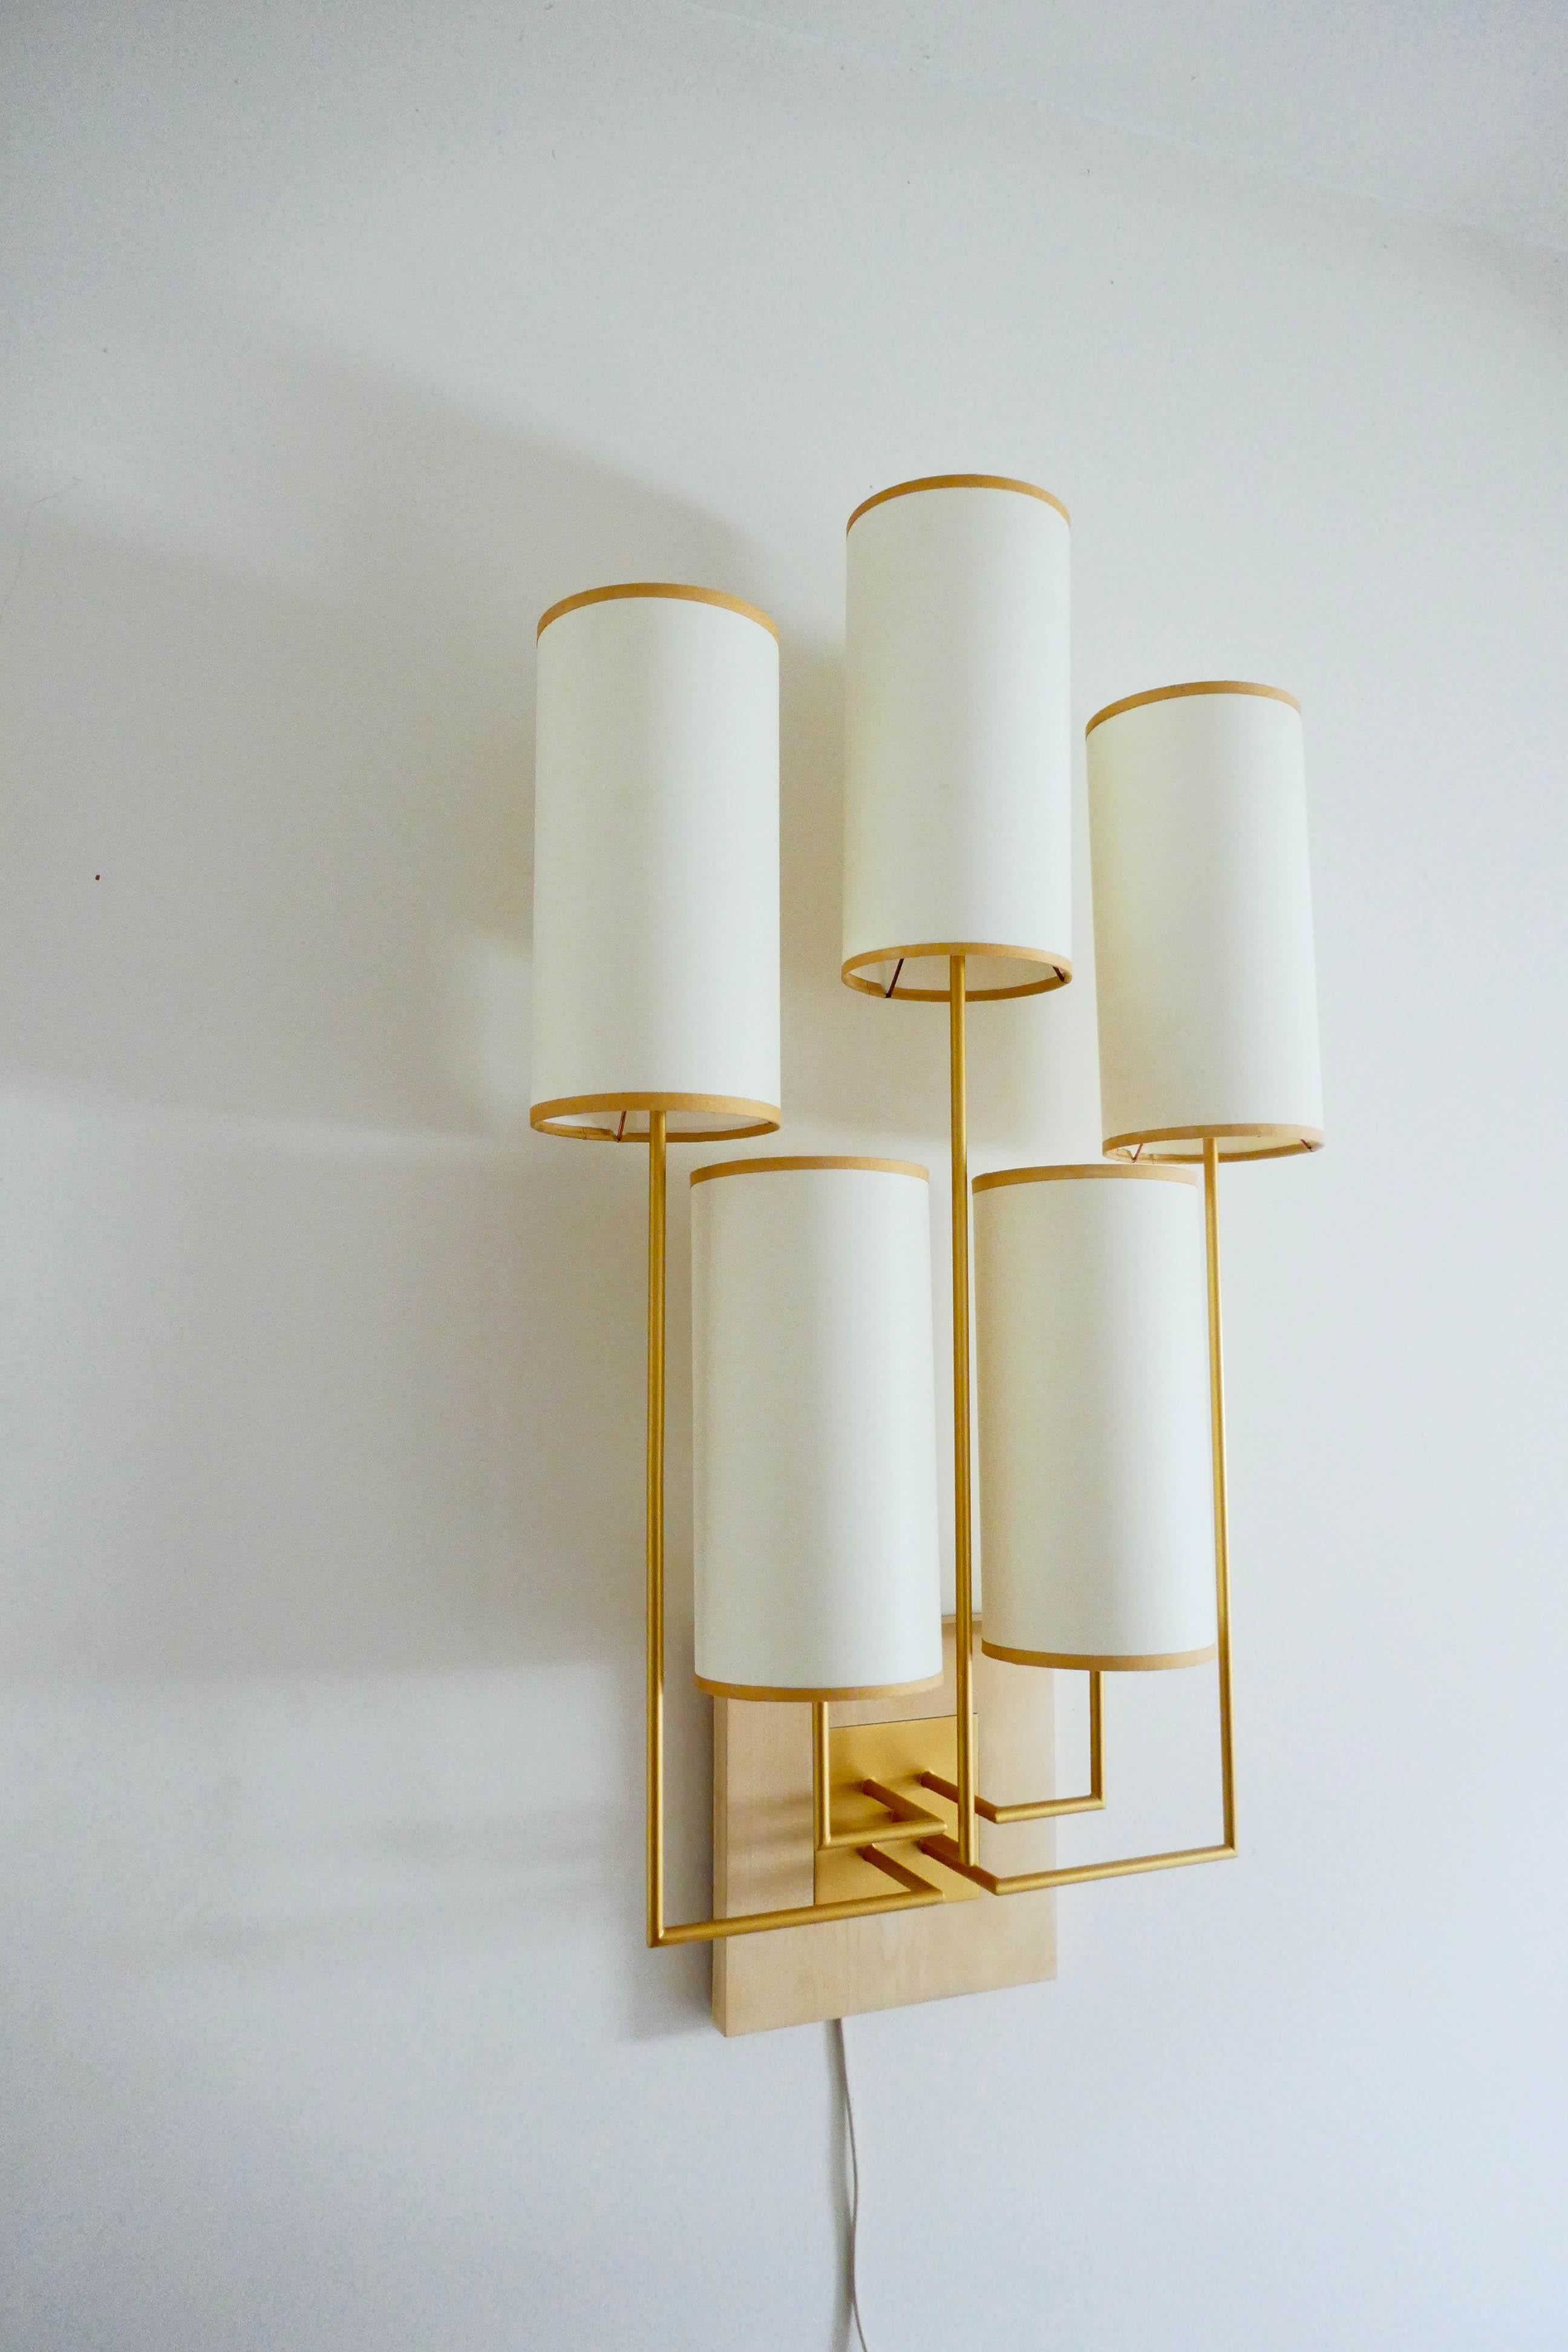 Metal Wall Light, Sconce in Gold Patina and Chestnut Wood